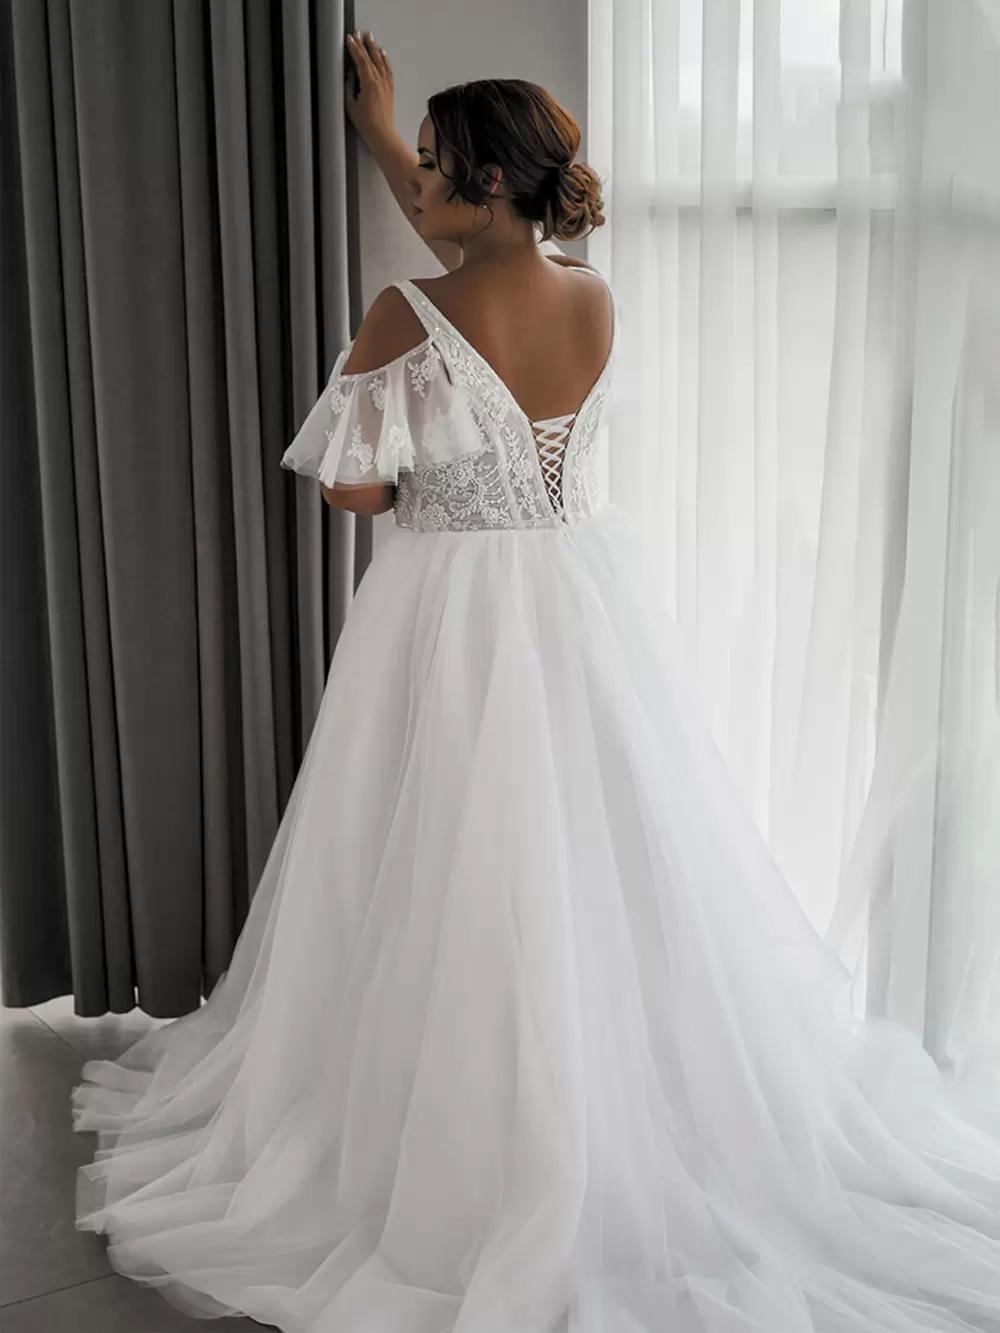 2023 A Line Wedding Dresses Sexy Off the Shoulder V Neck Illusion Lace Appliques Crystal Beads Tulle Bridal Gowns Sweep Train Plus Size vestido de noiva Open Back